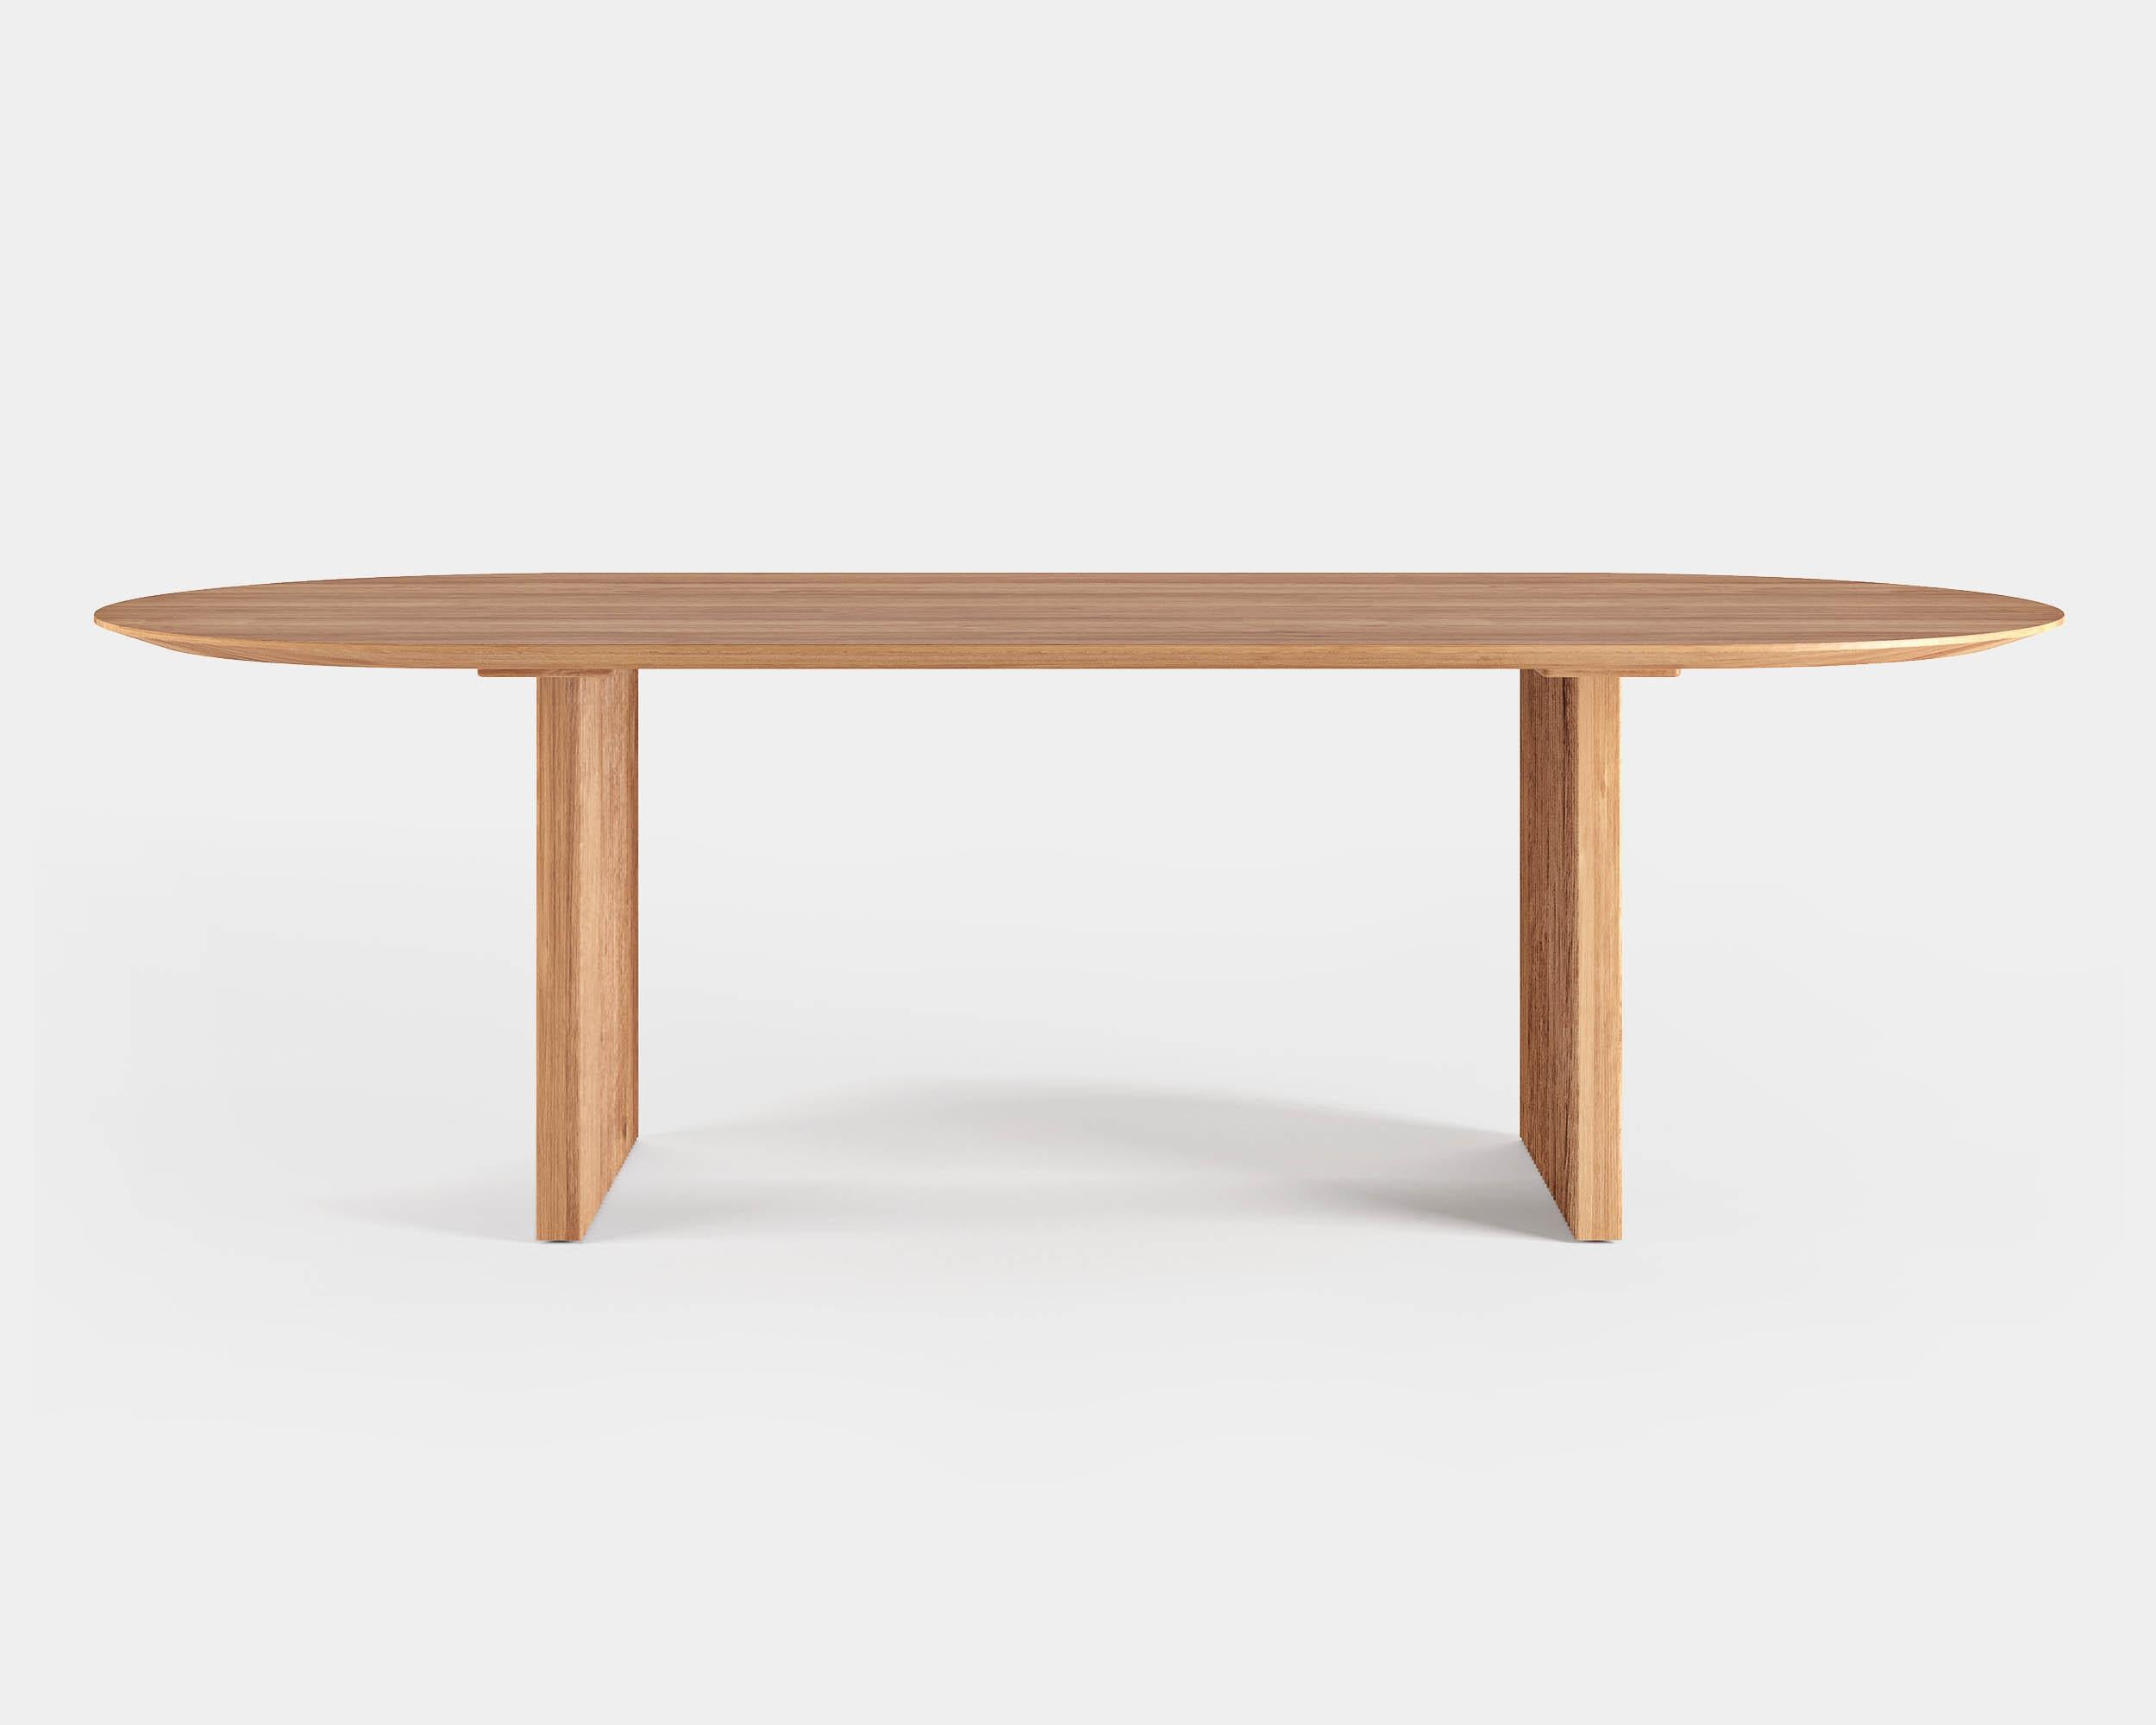 Ten dining table, oval, 370 cm.
Solid wood table top and legs. Handmade in Denmark. 

Measures: height: 72 or 74 cm.

Table top dimensions:
– 200 x 95 cm
– 240 x 105 cm
– 270 x 105 cm
– 300 x 105 cm
– 340 x 105 cm
– 370 x 105 cm
– 400 x